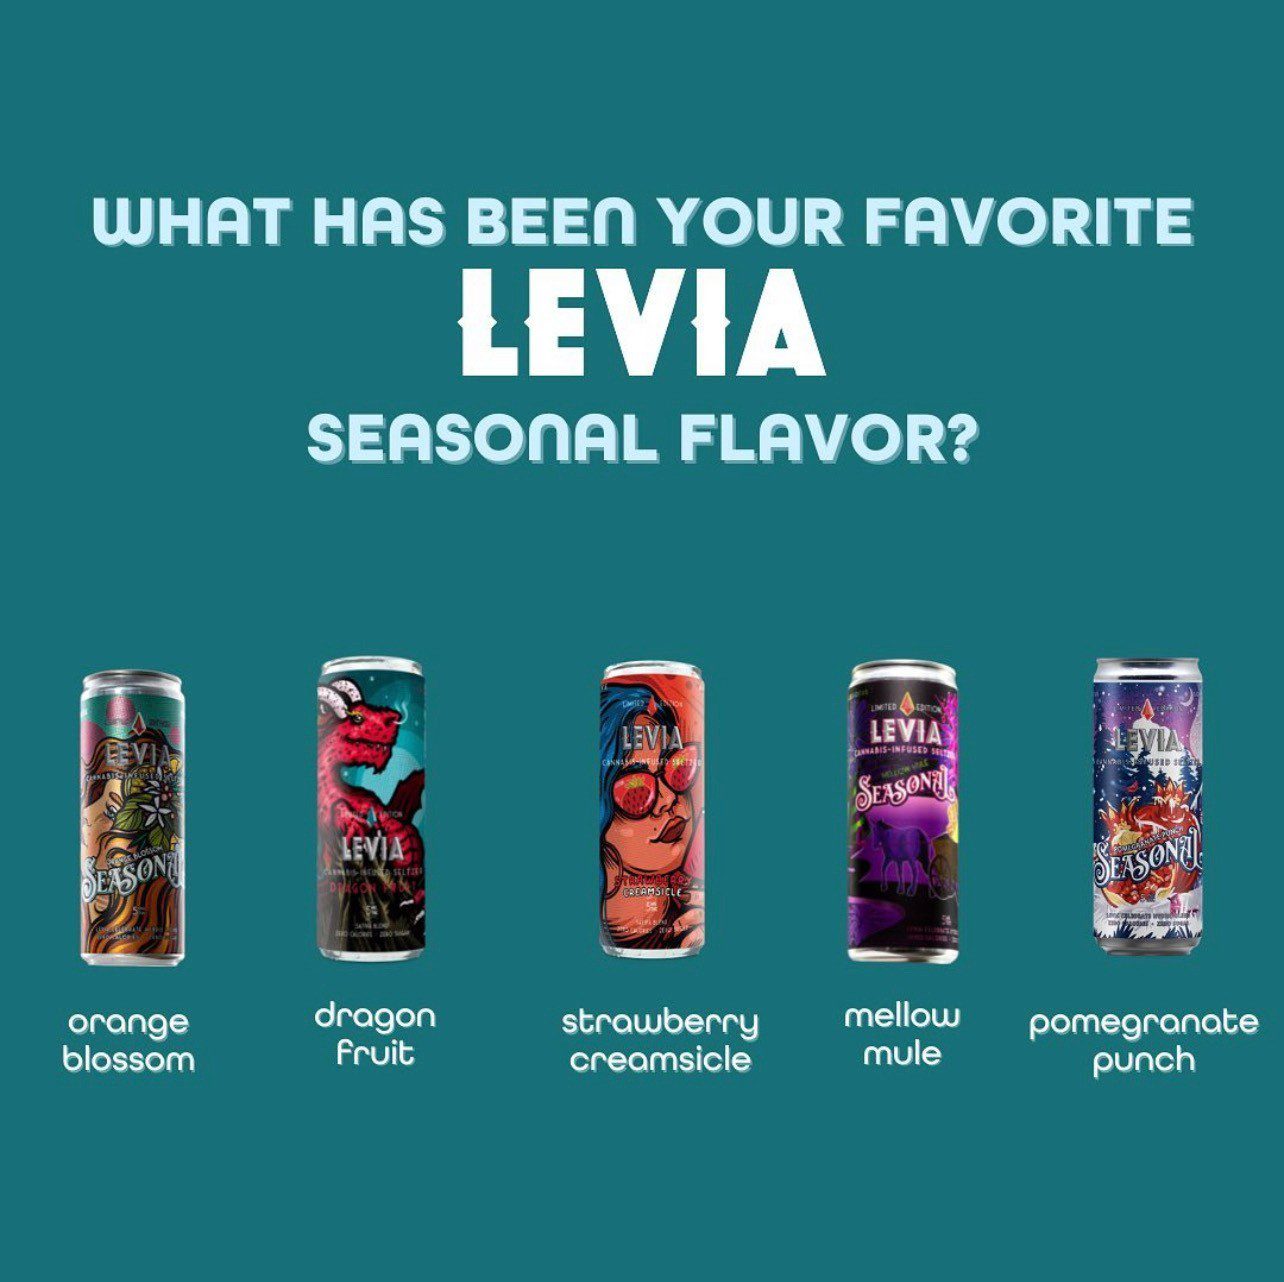 A flavor for every season... but what has been your favorite?
Repost @ayrwellness